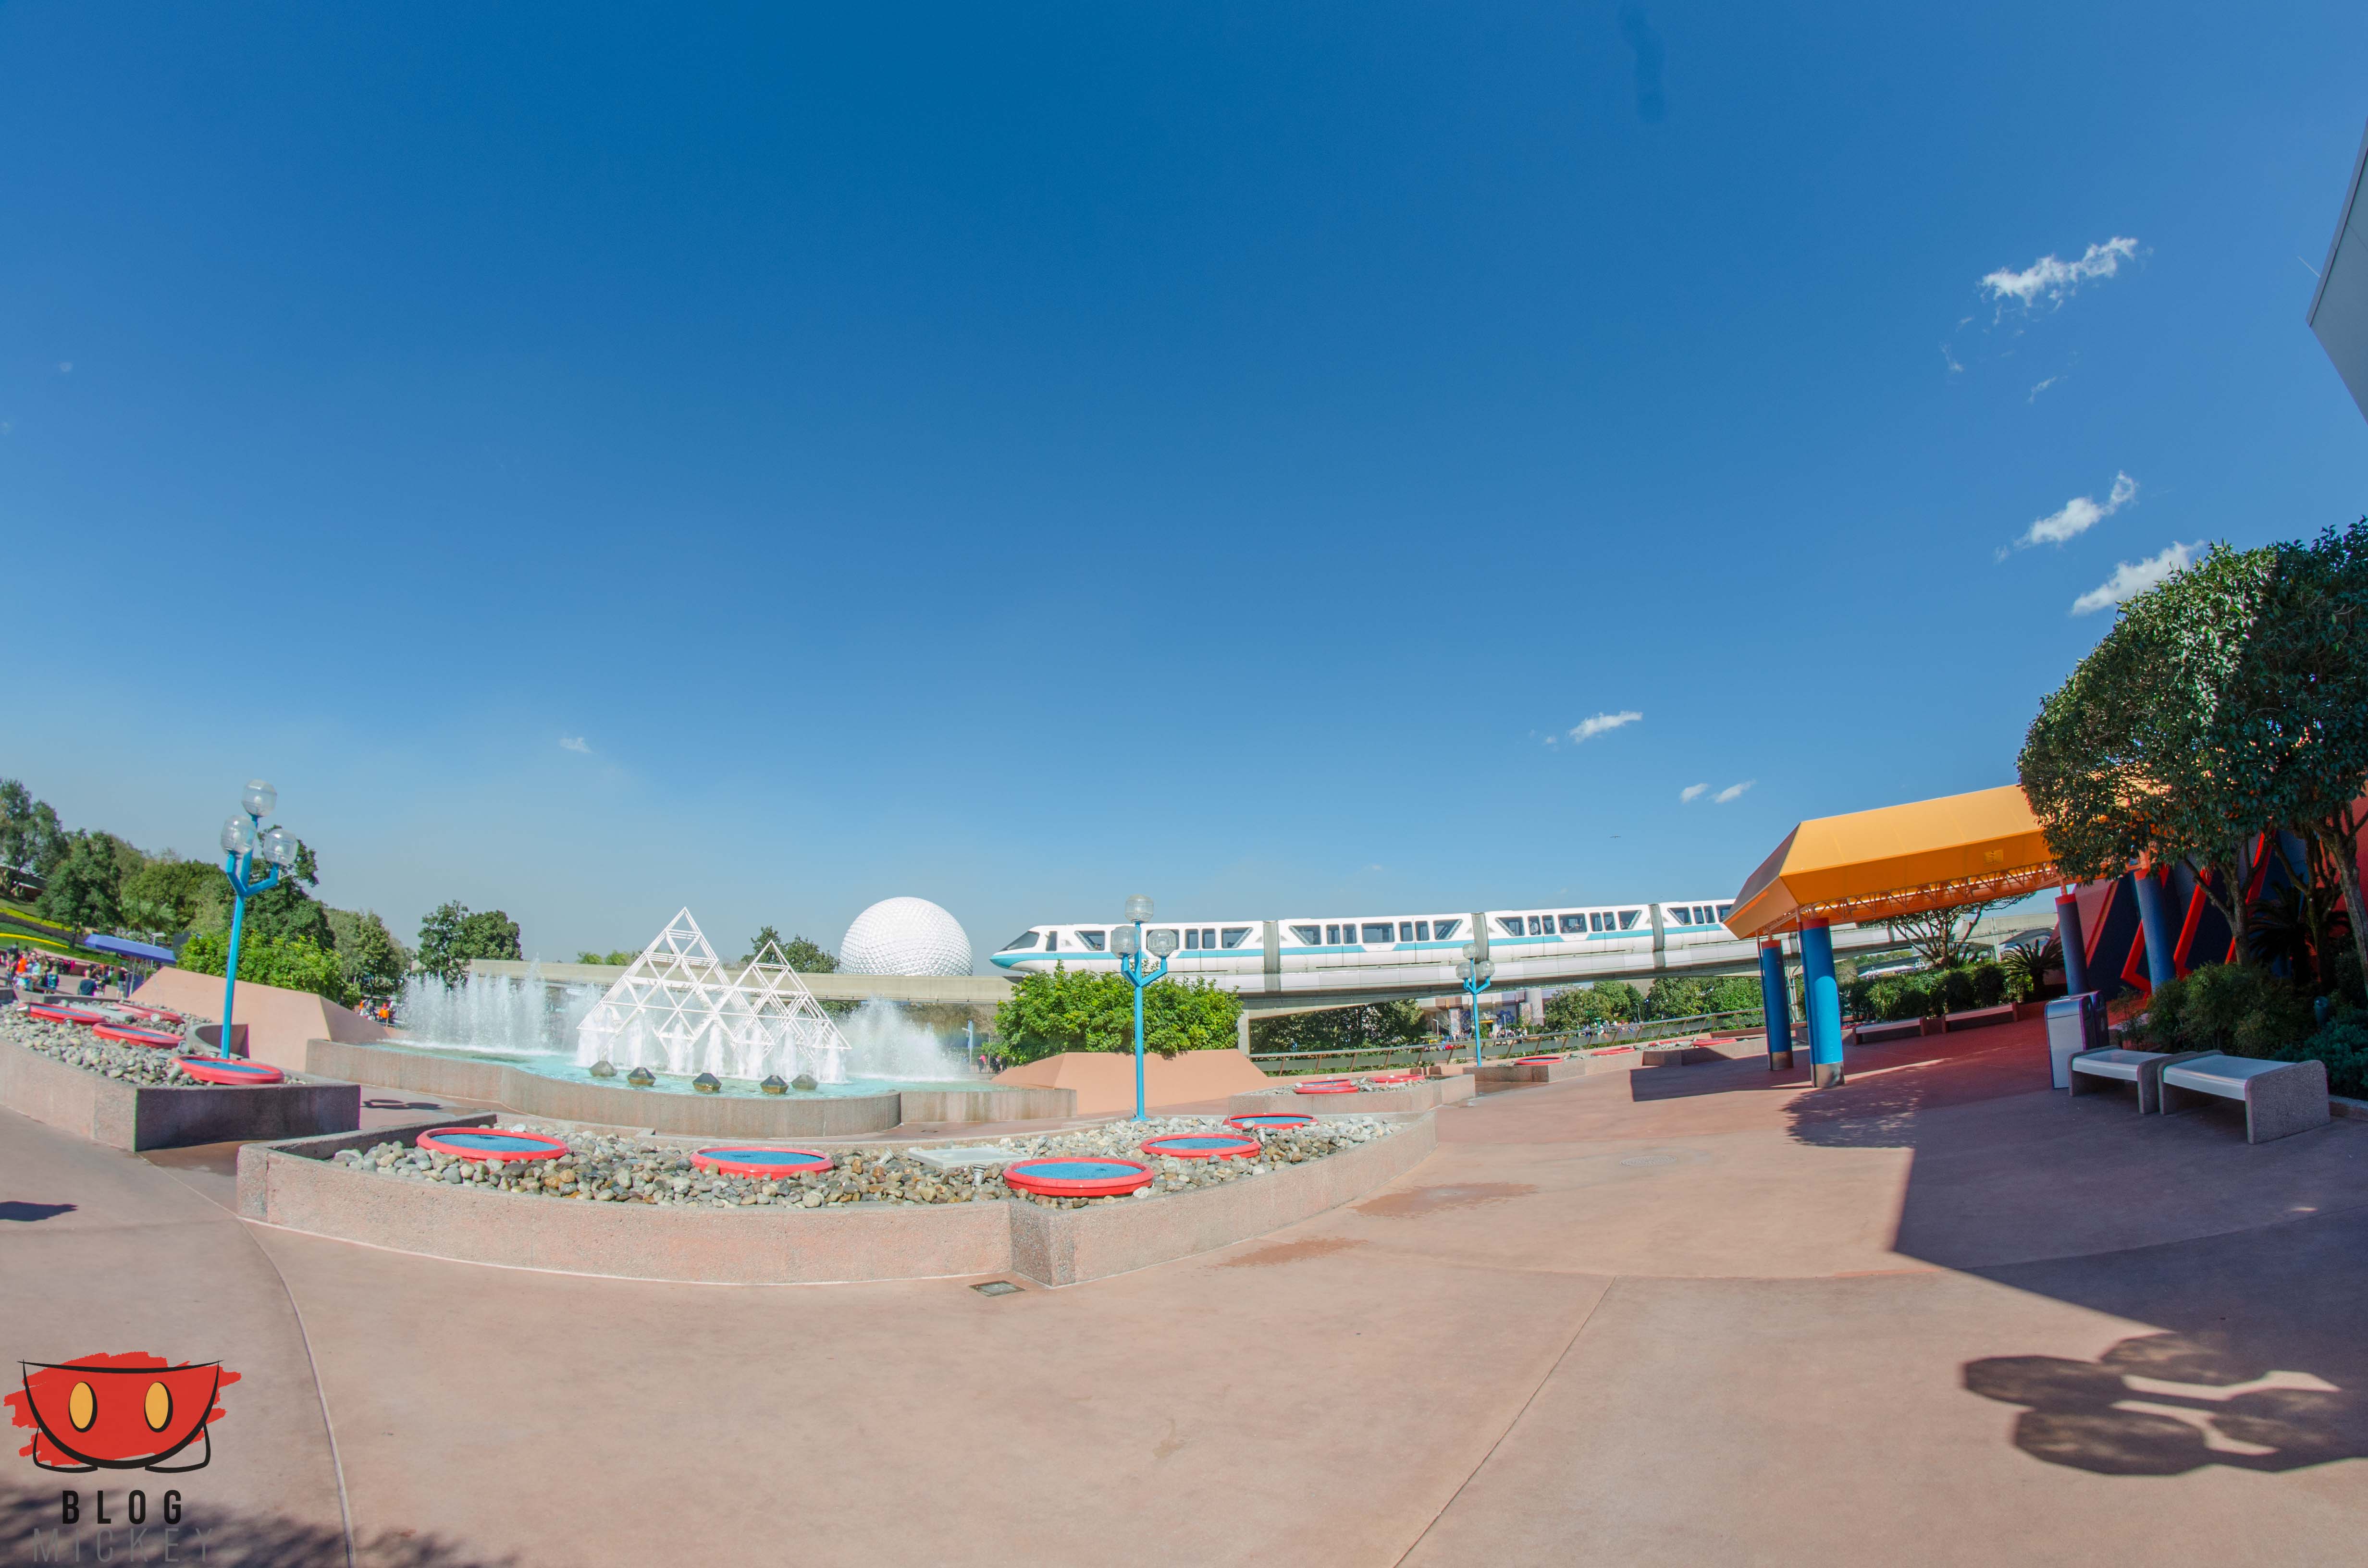 EpcotPhotoUpdate_02102016-15